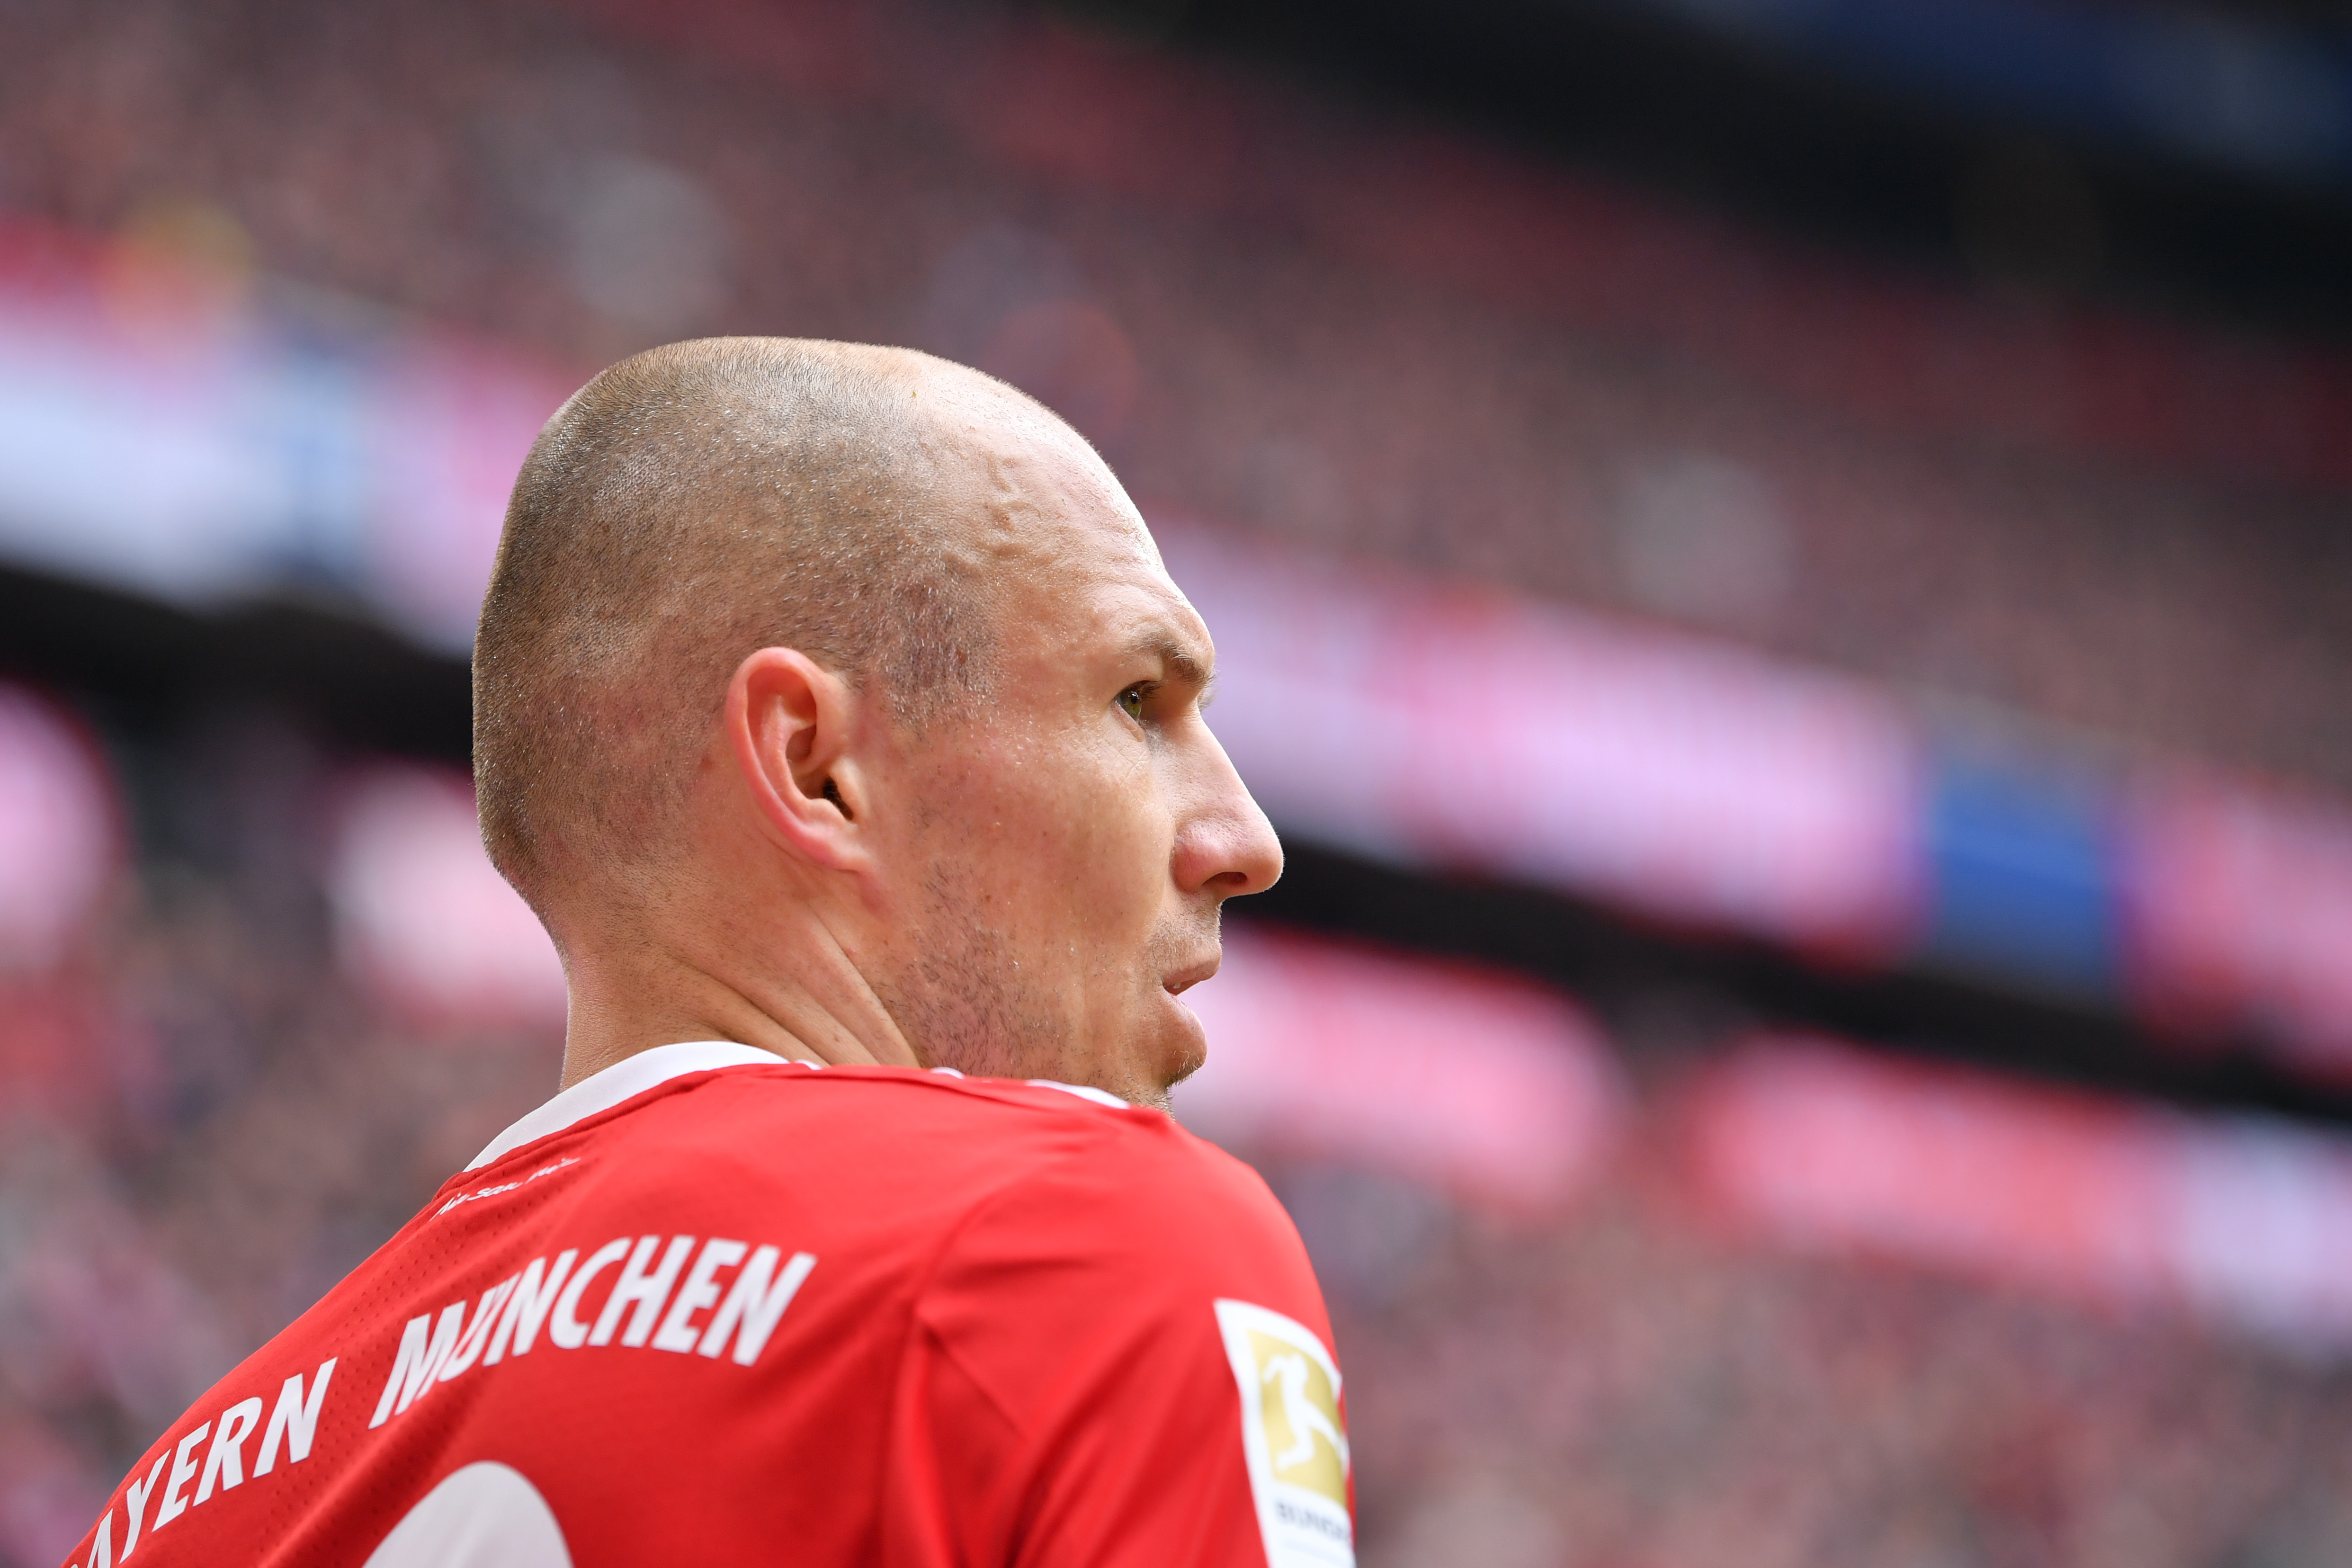 MUNICH, GERMANY - MARCH 10: Arjen Robben of Bayern Muenchen looks on during the Bundesliga match between FC Bayern Muenchen and Hamburger SV at Allianz Arena on March 10, 2018 in Munich, Germany. (Photo by Sebastian Widmann/Bongarts/Getty Images)